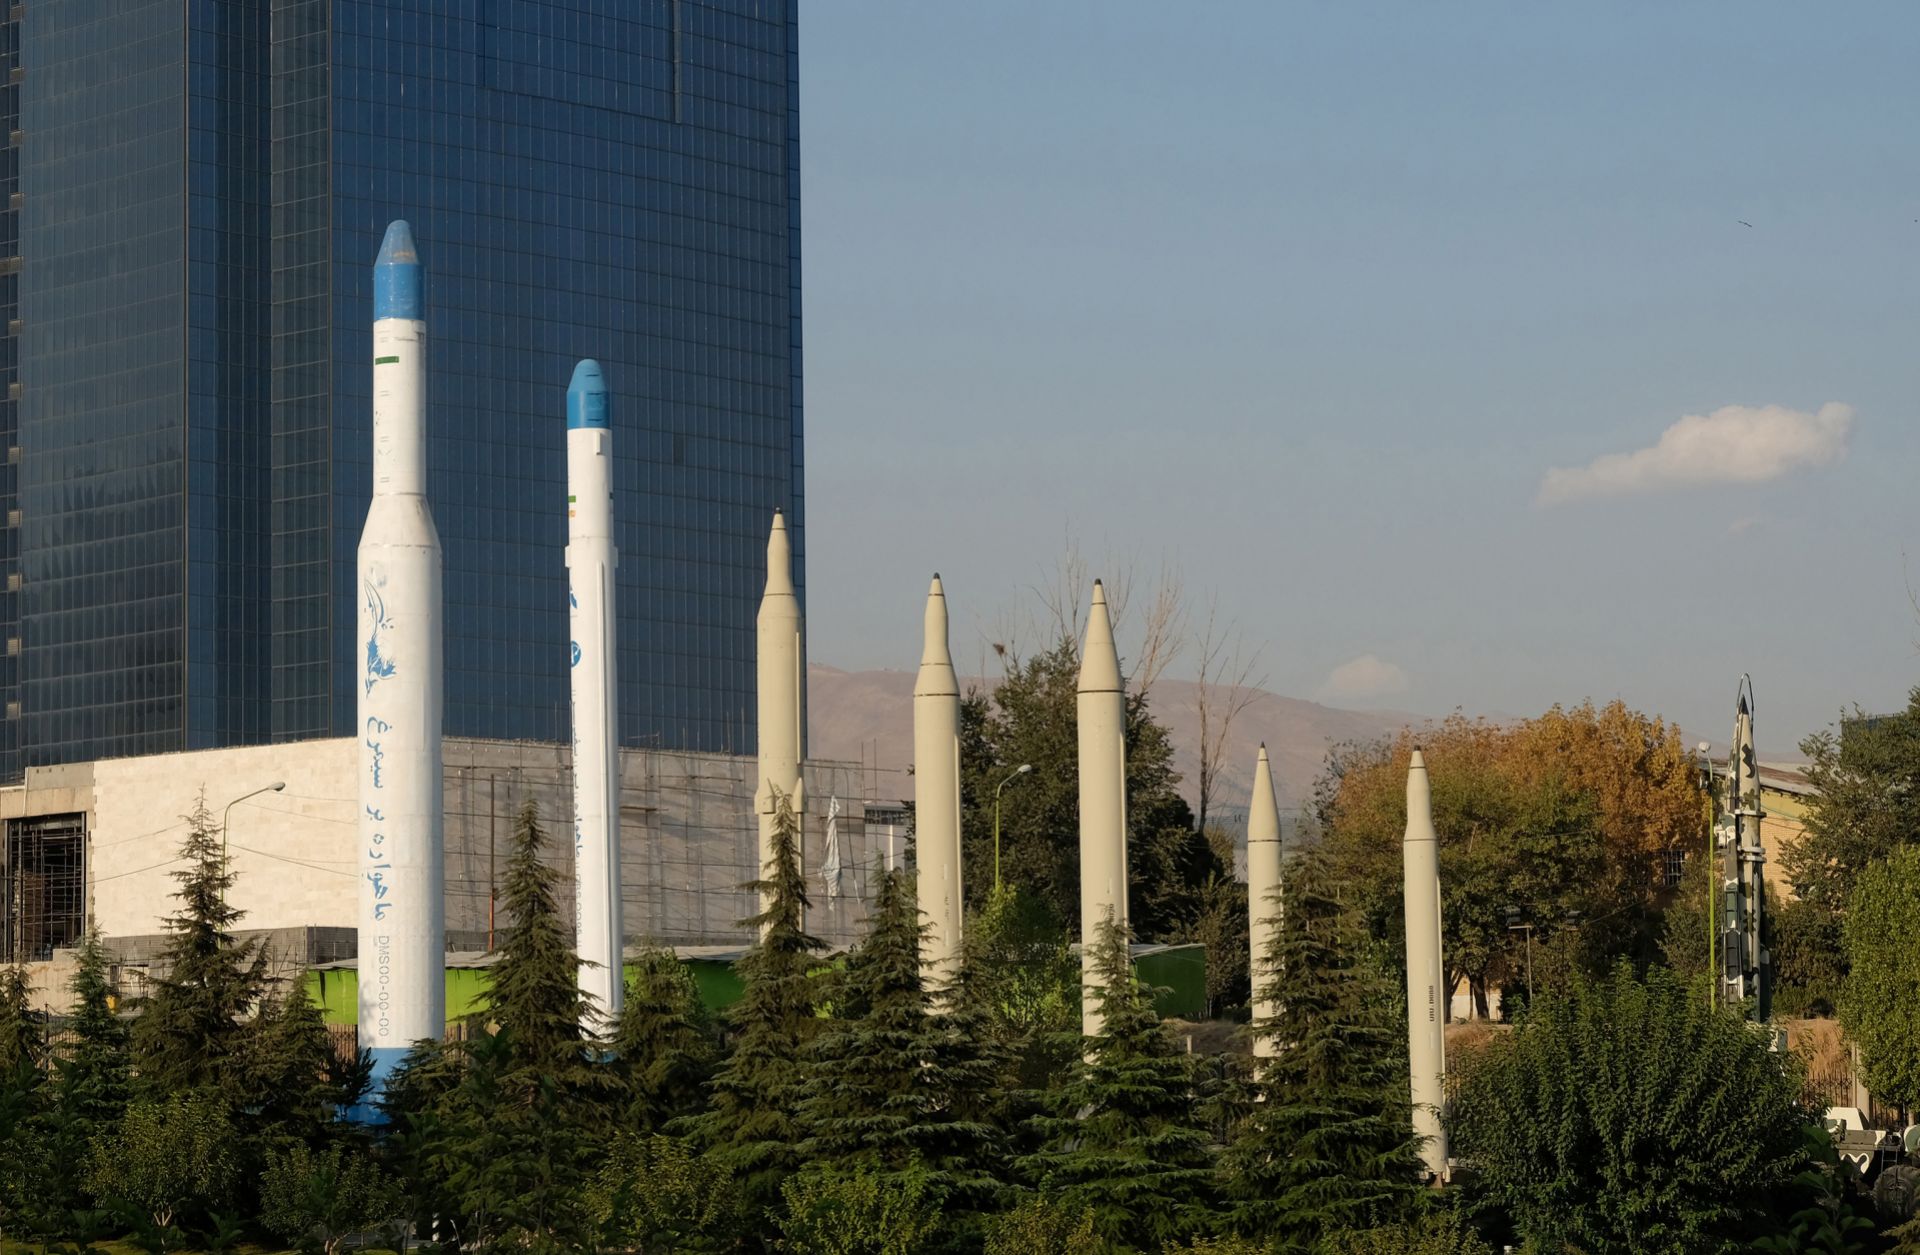 Iranian-made satellite carriers (left) and missiles (right) are displayed in front of the Holy Defense Museum in Tehran, Iran, on Sept. 20, 2020.